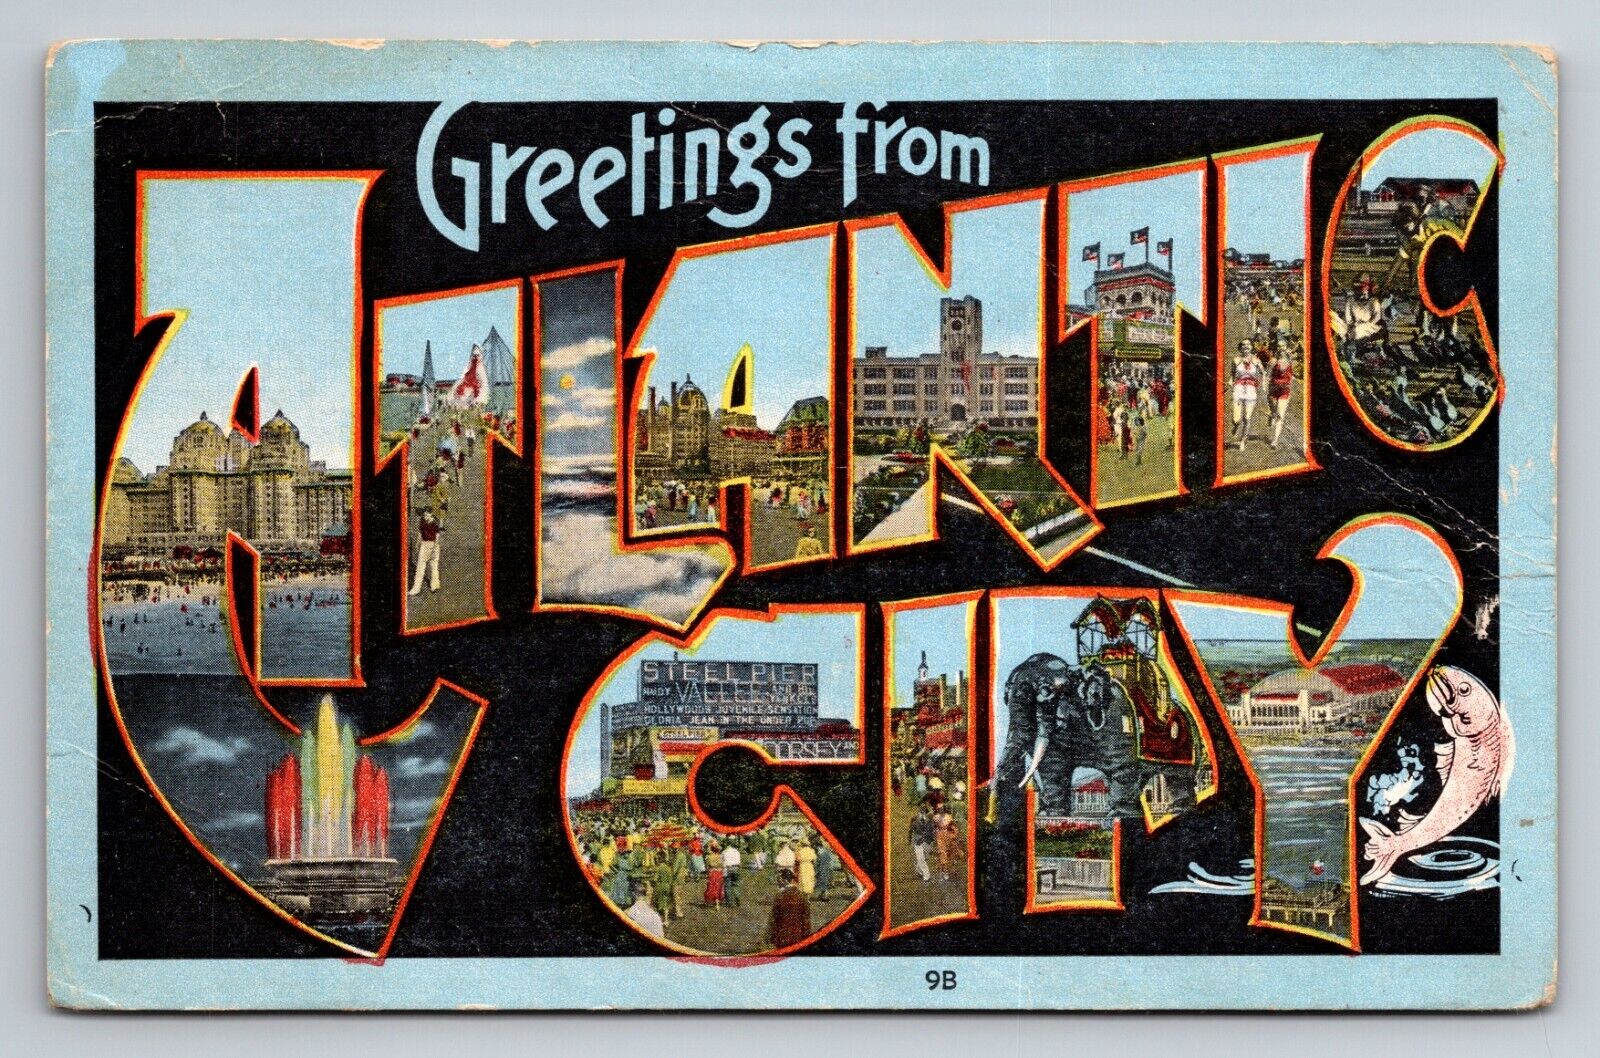 Greetings from Atlantic City New Jersey Vintage Unposted Linen Postcard